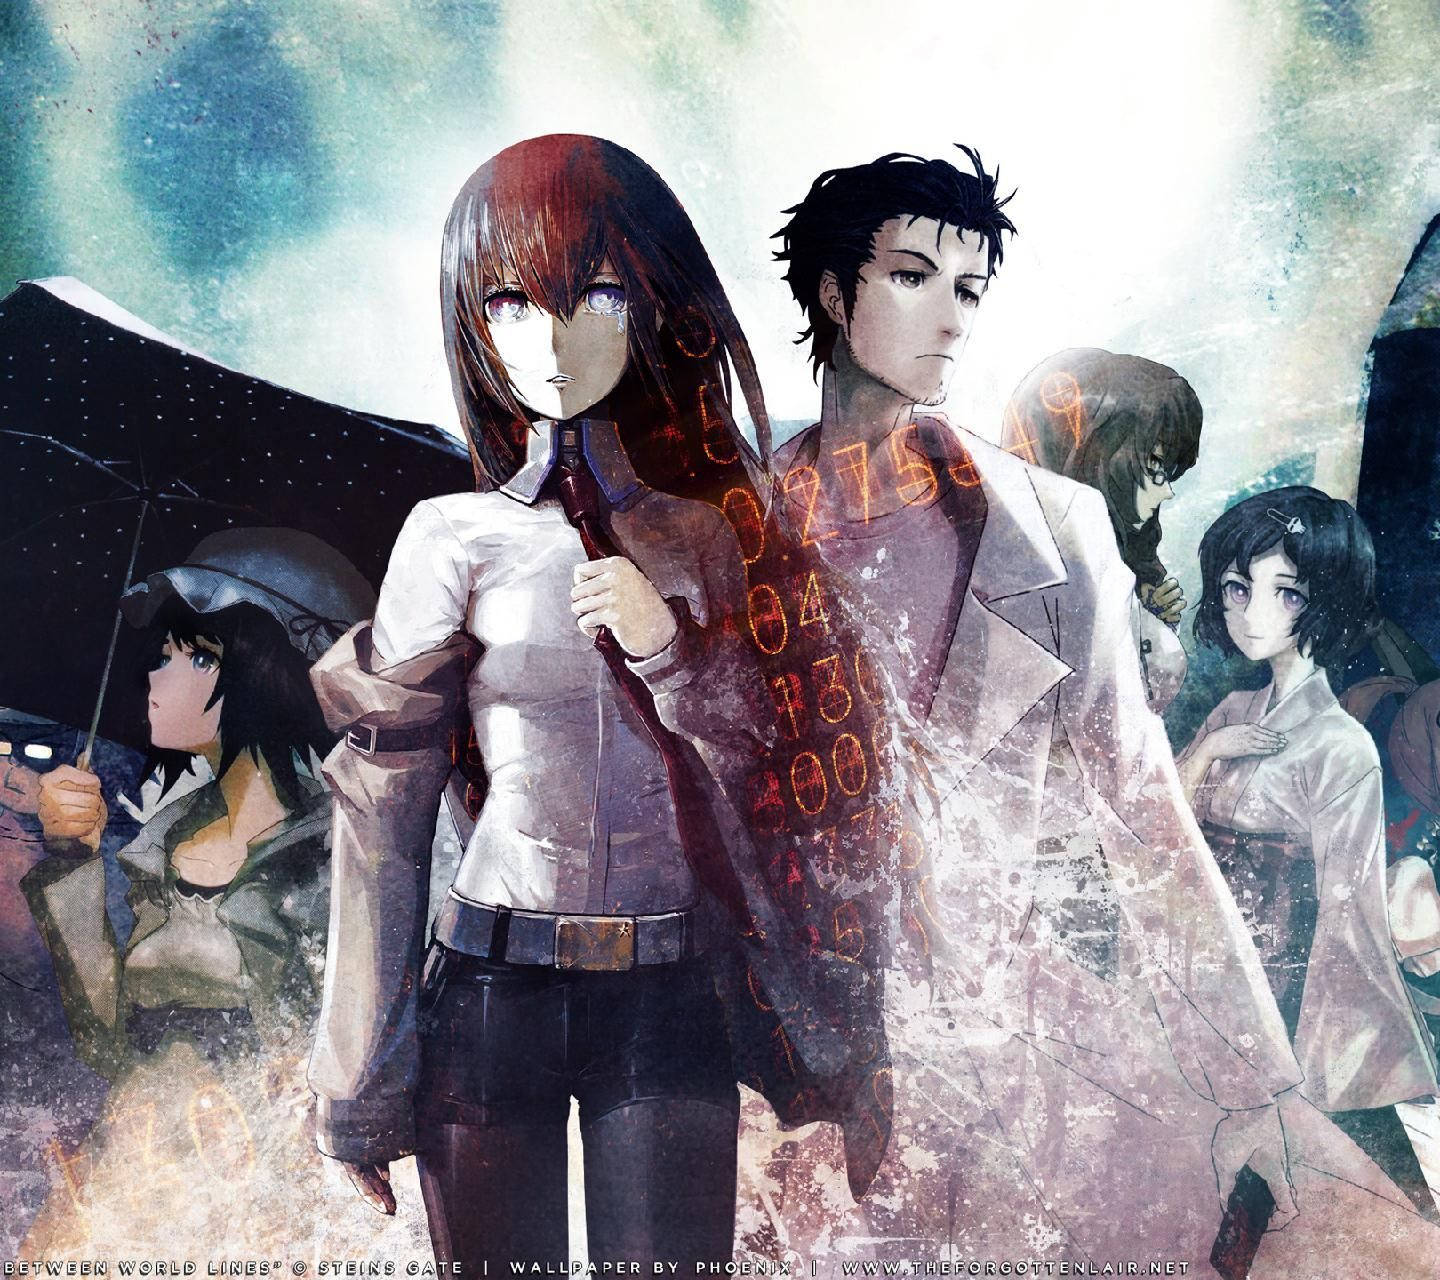 1440X1280 Steins Gate Wallpaper and Background